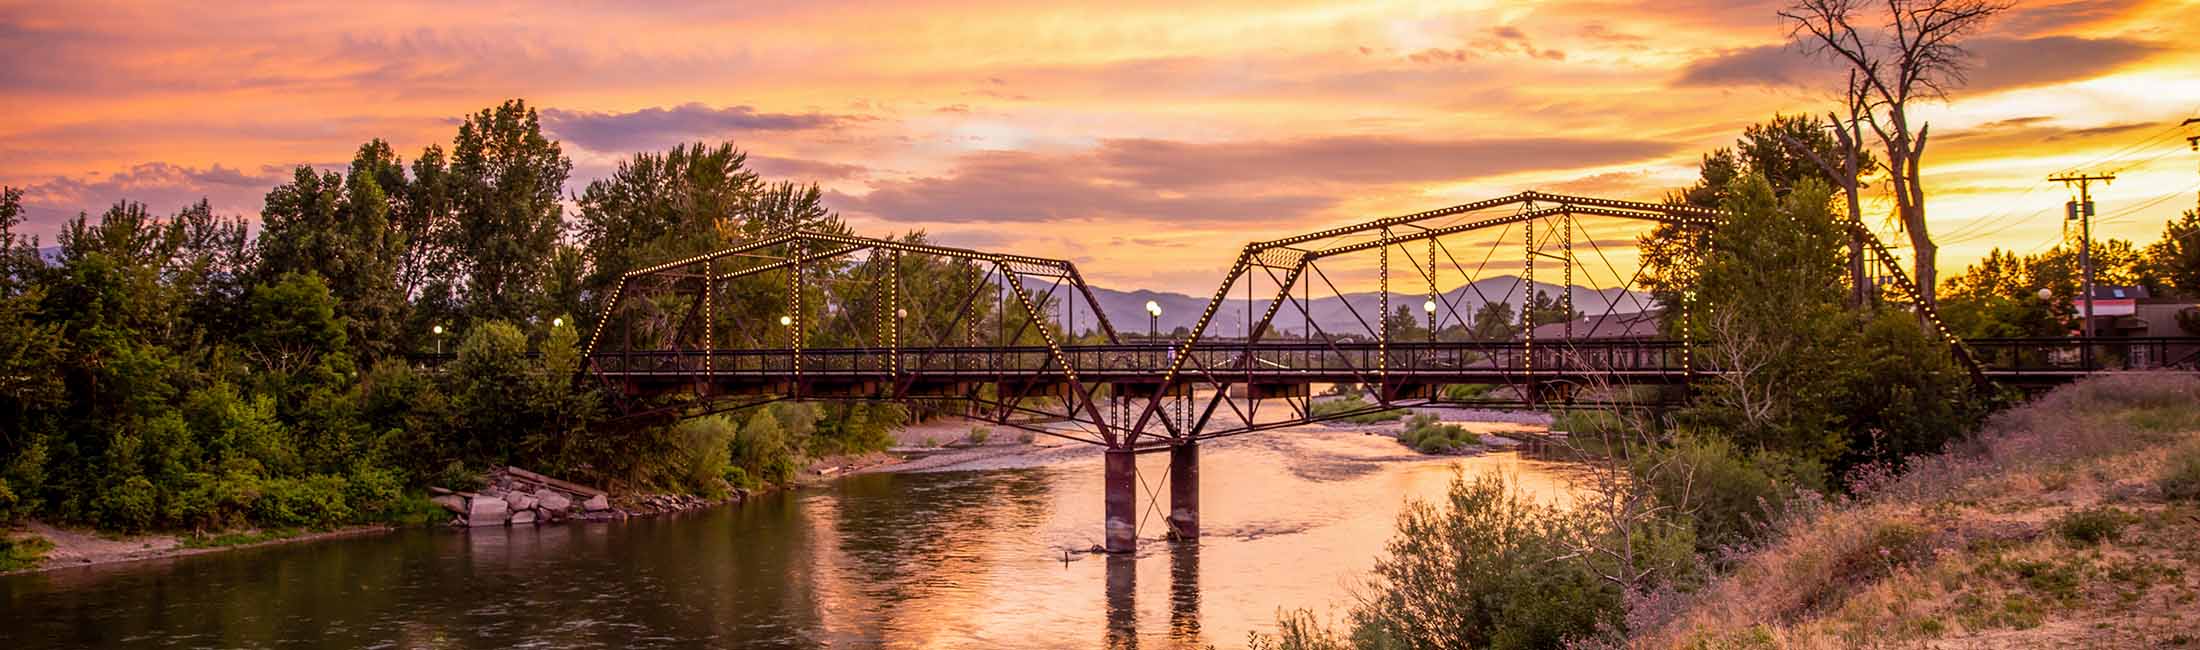 5 Reasons Remote Students and Workers Should Visit Missoula